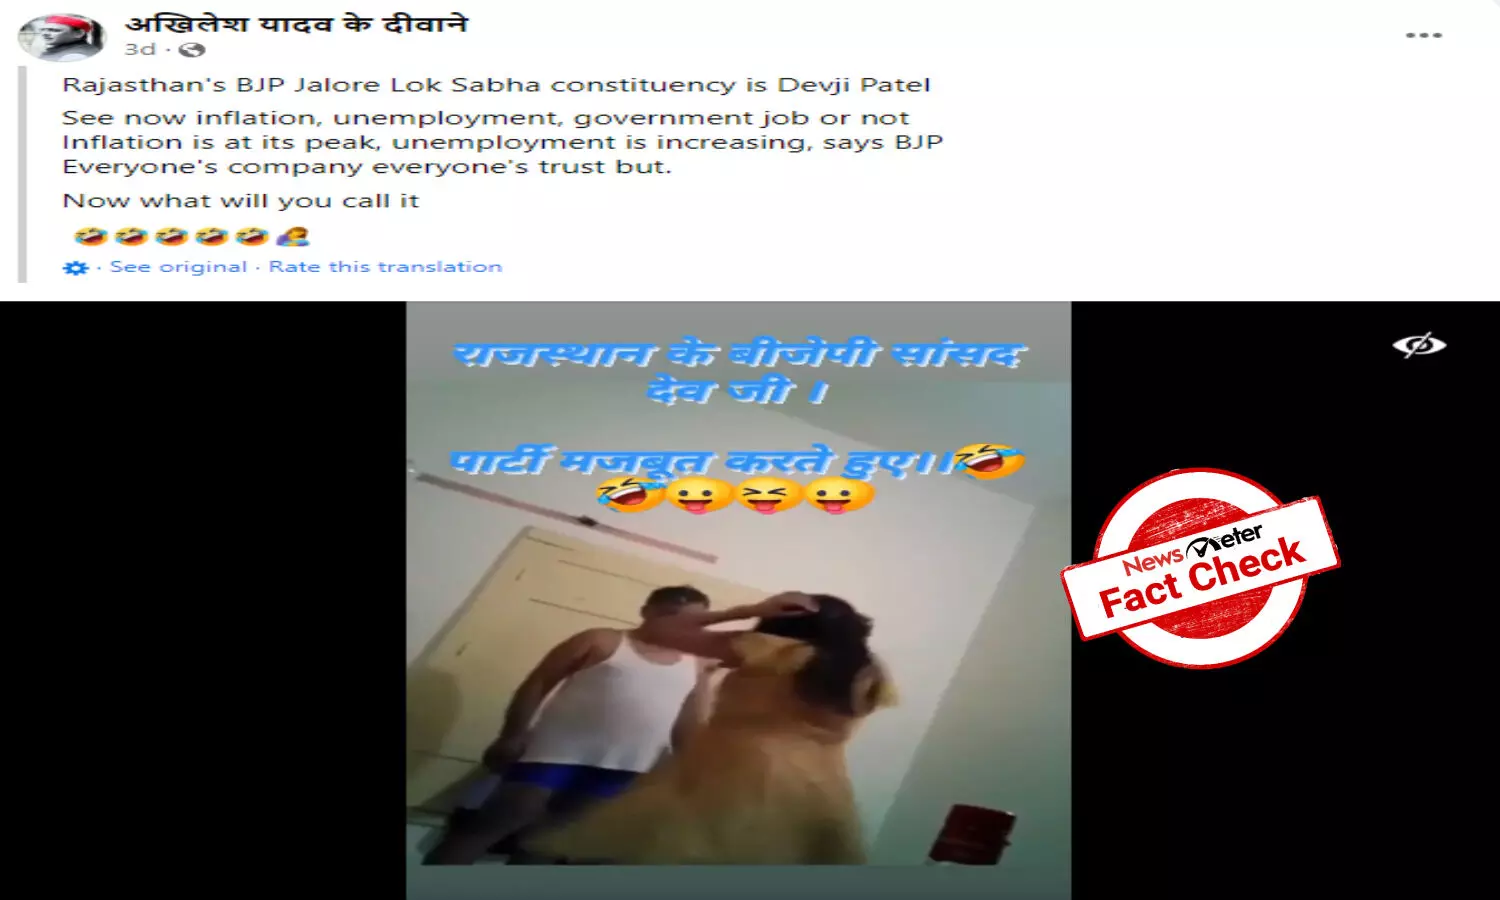 Pakistani doctors inappropriate video passed off as BJP MP Devji Patels sex scandal pic pic